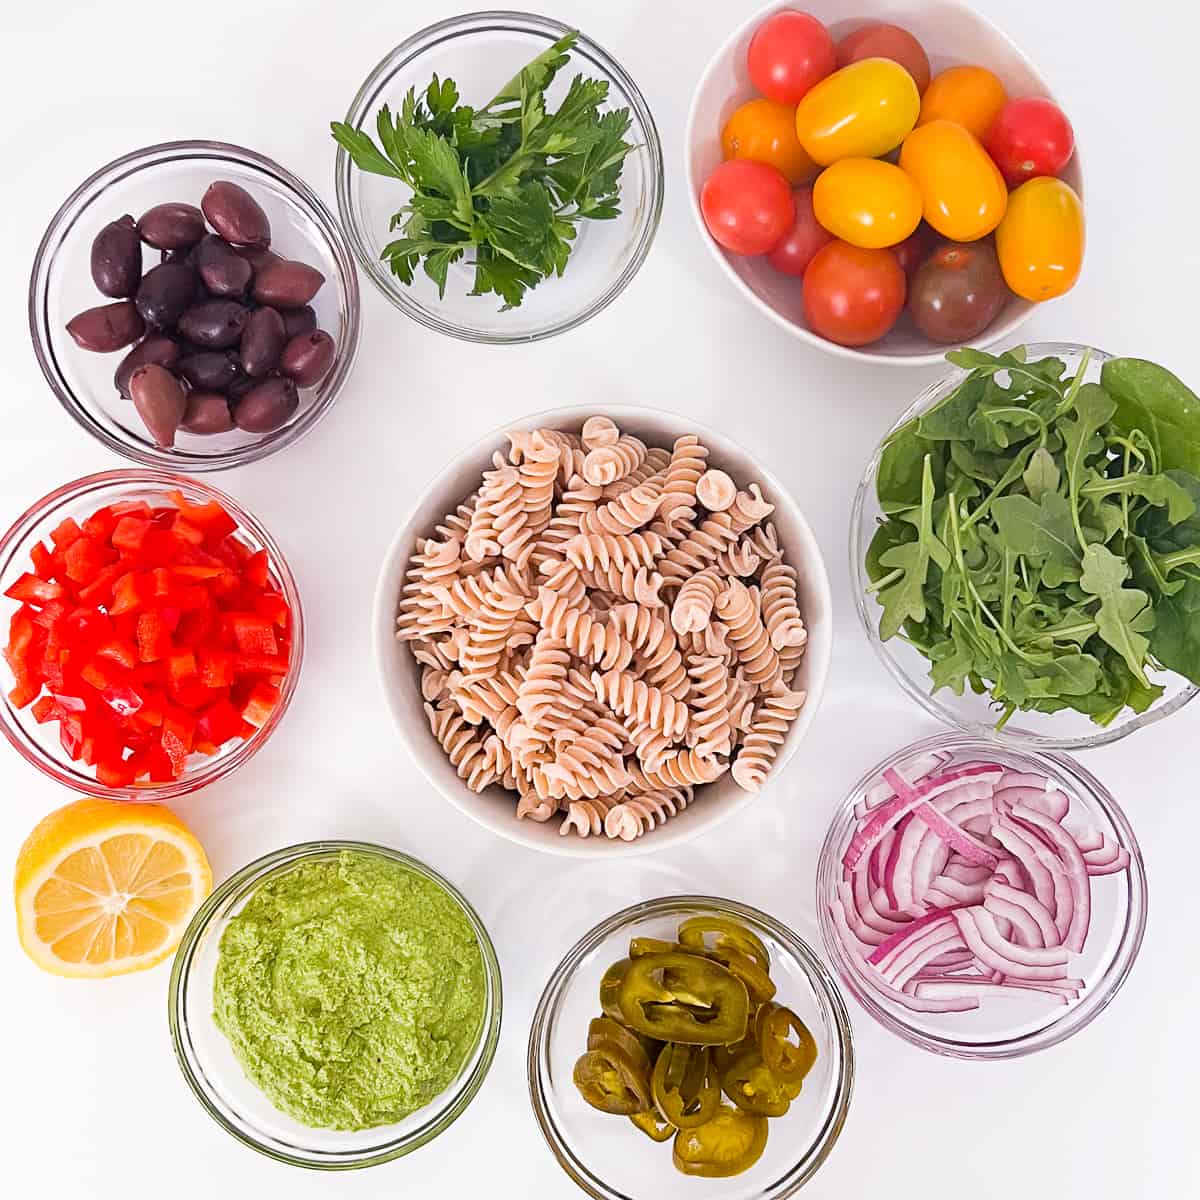 top view of the key ingredients: whole grain fusilli pasta, vegan almond pesto, cherry/grape tomatoes, arugula/spinach, red onion, pickled jalapenos, red bell pepper, pitted Kalamata olives, lemon, fresh parsley